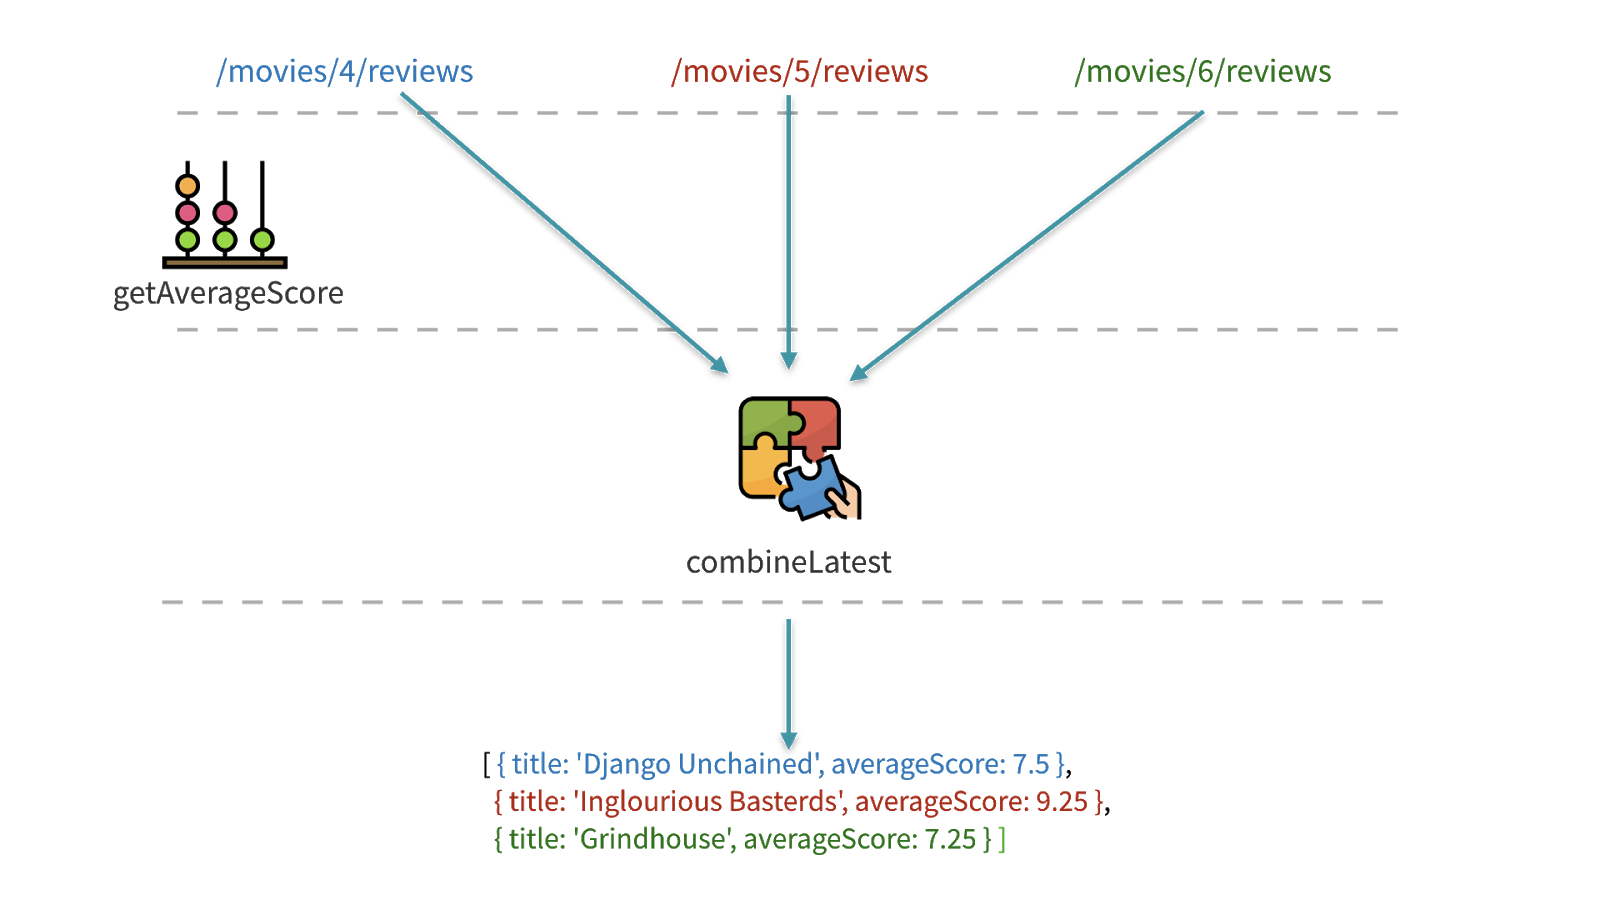 depiction of data from multiple APIs being combined into an array by the combineLatest operator